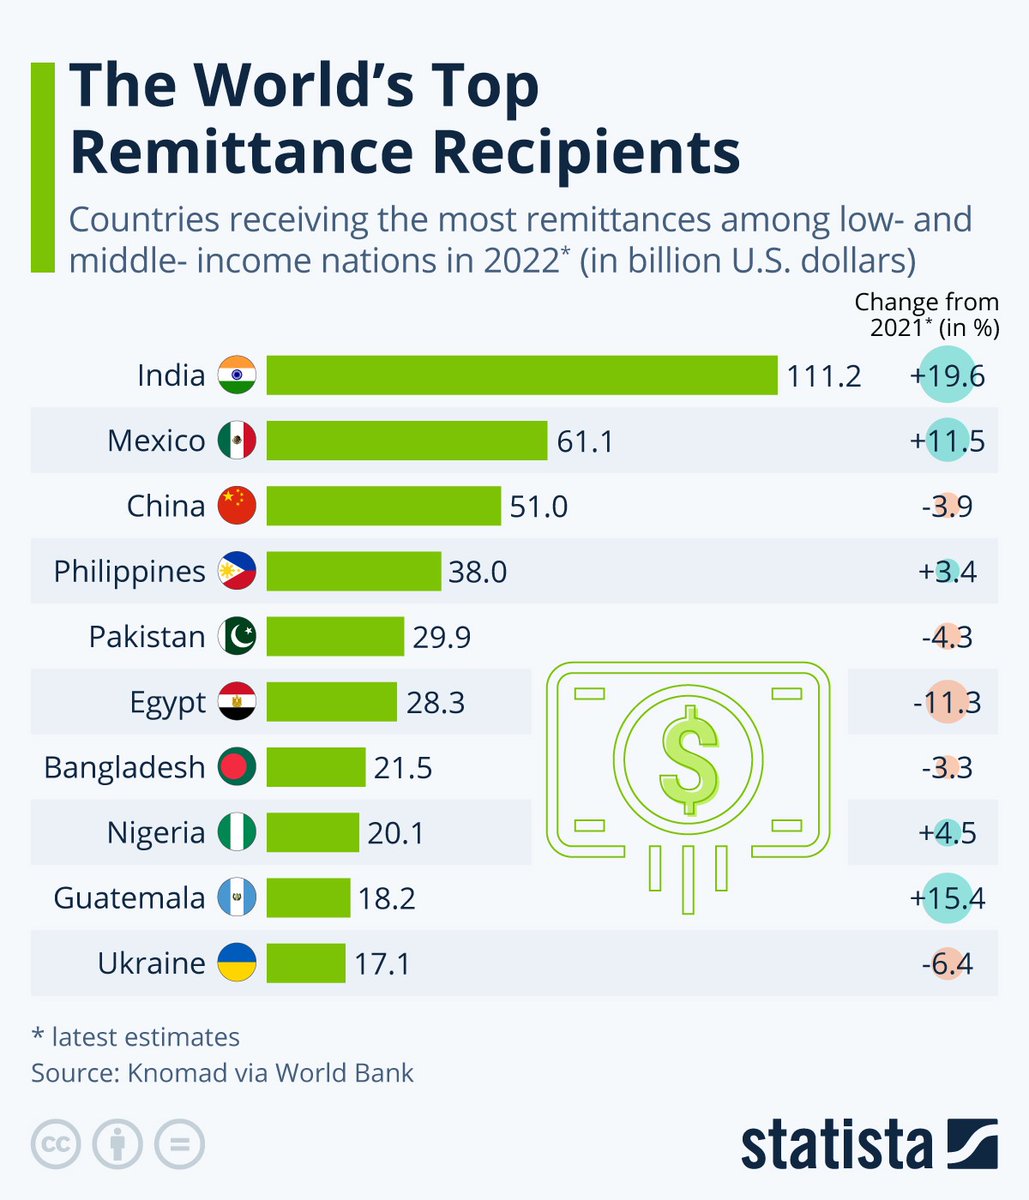 Public debate in 🇳🇬 gives impression there are millions and millions of Nigerians abroad. $20bln in remittances is often cited as proof. 

But as shown here, other nations get more and even Guatemalans, a nation of just 18m people, sent home almost as much as Nigerians in 2022!